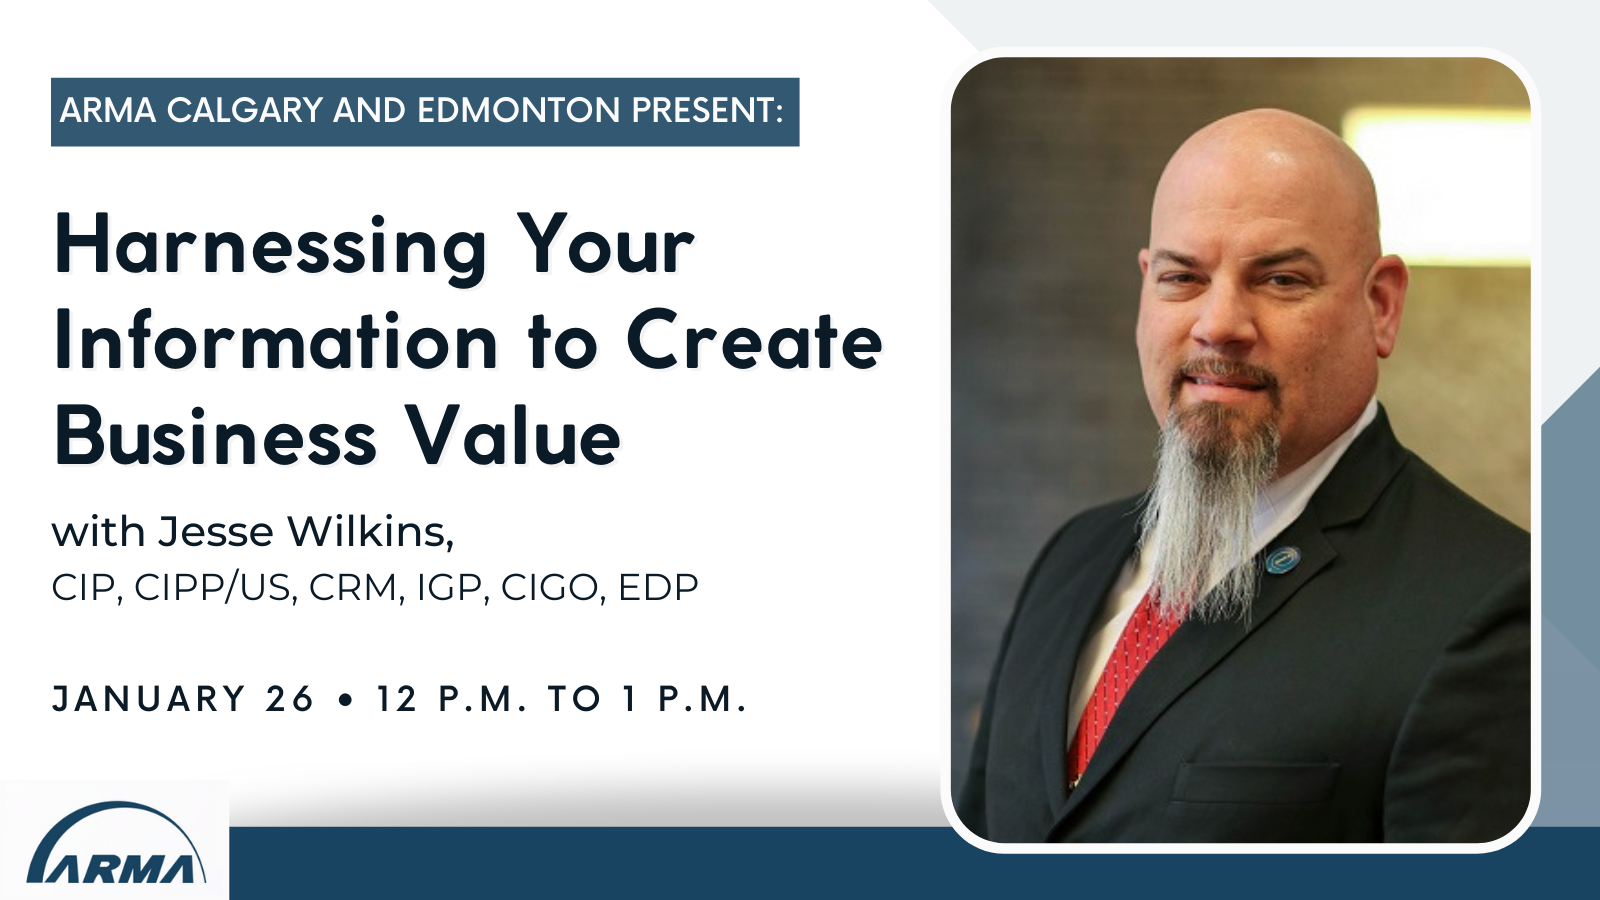 Harnessing Your Information to Create Business Value Image with date January 26, 2022 and time 12:00 p.m. MST